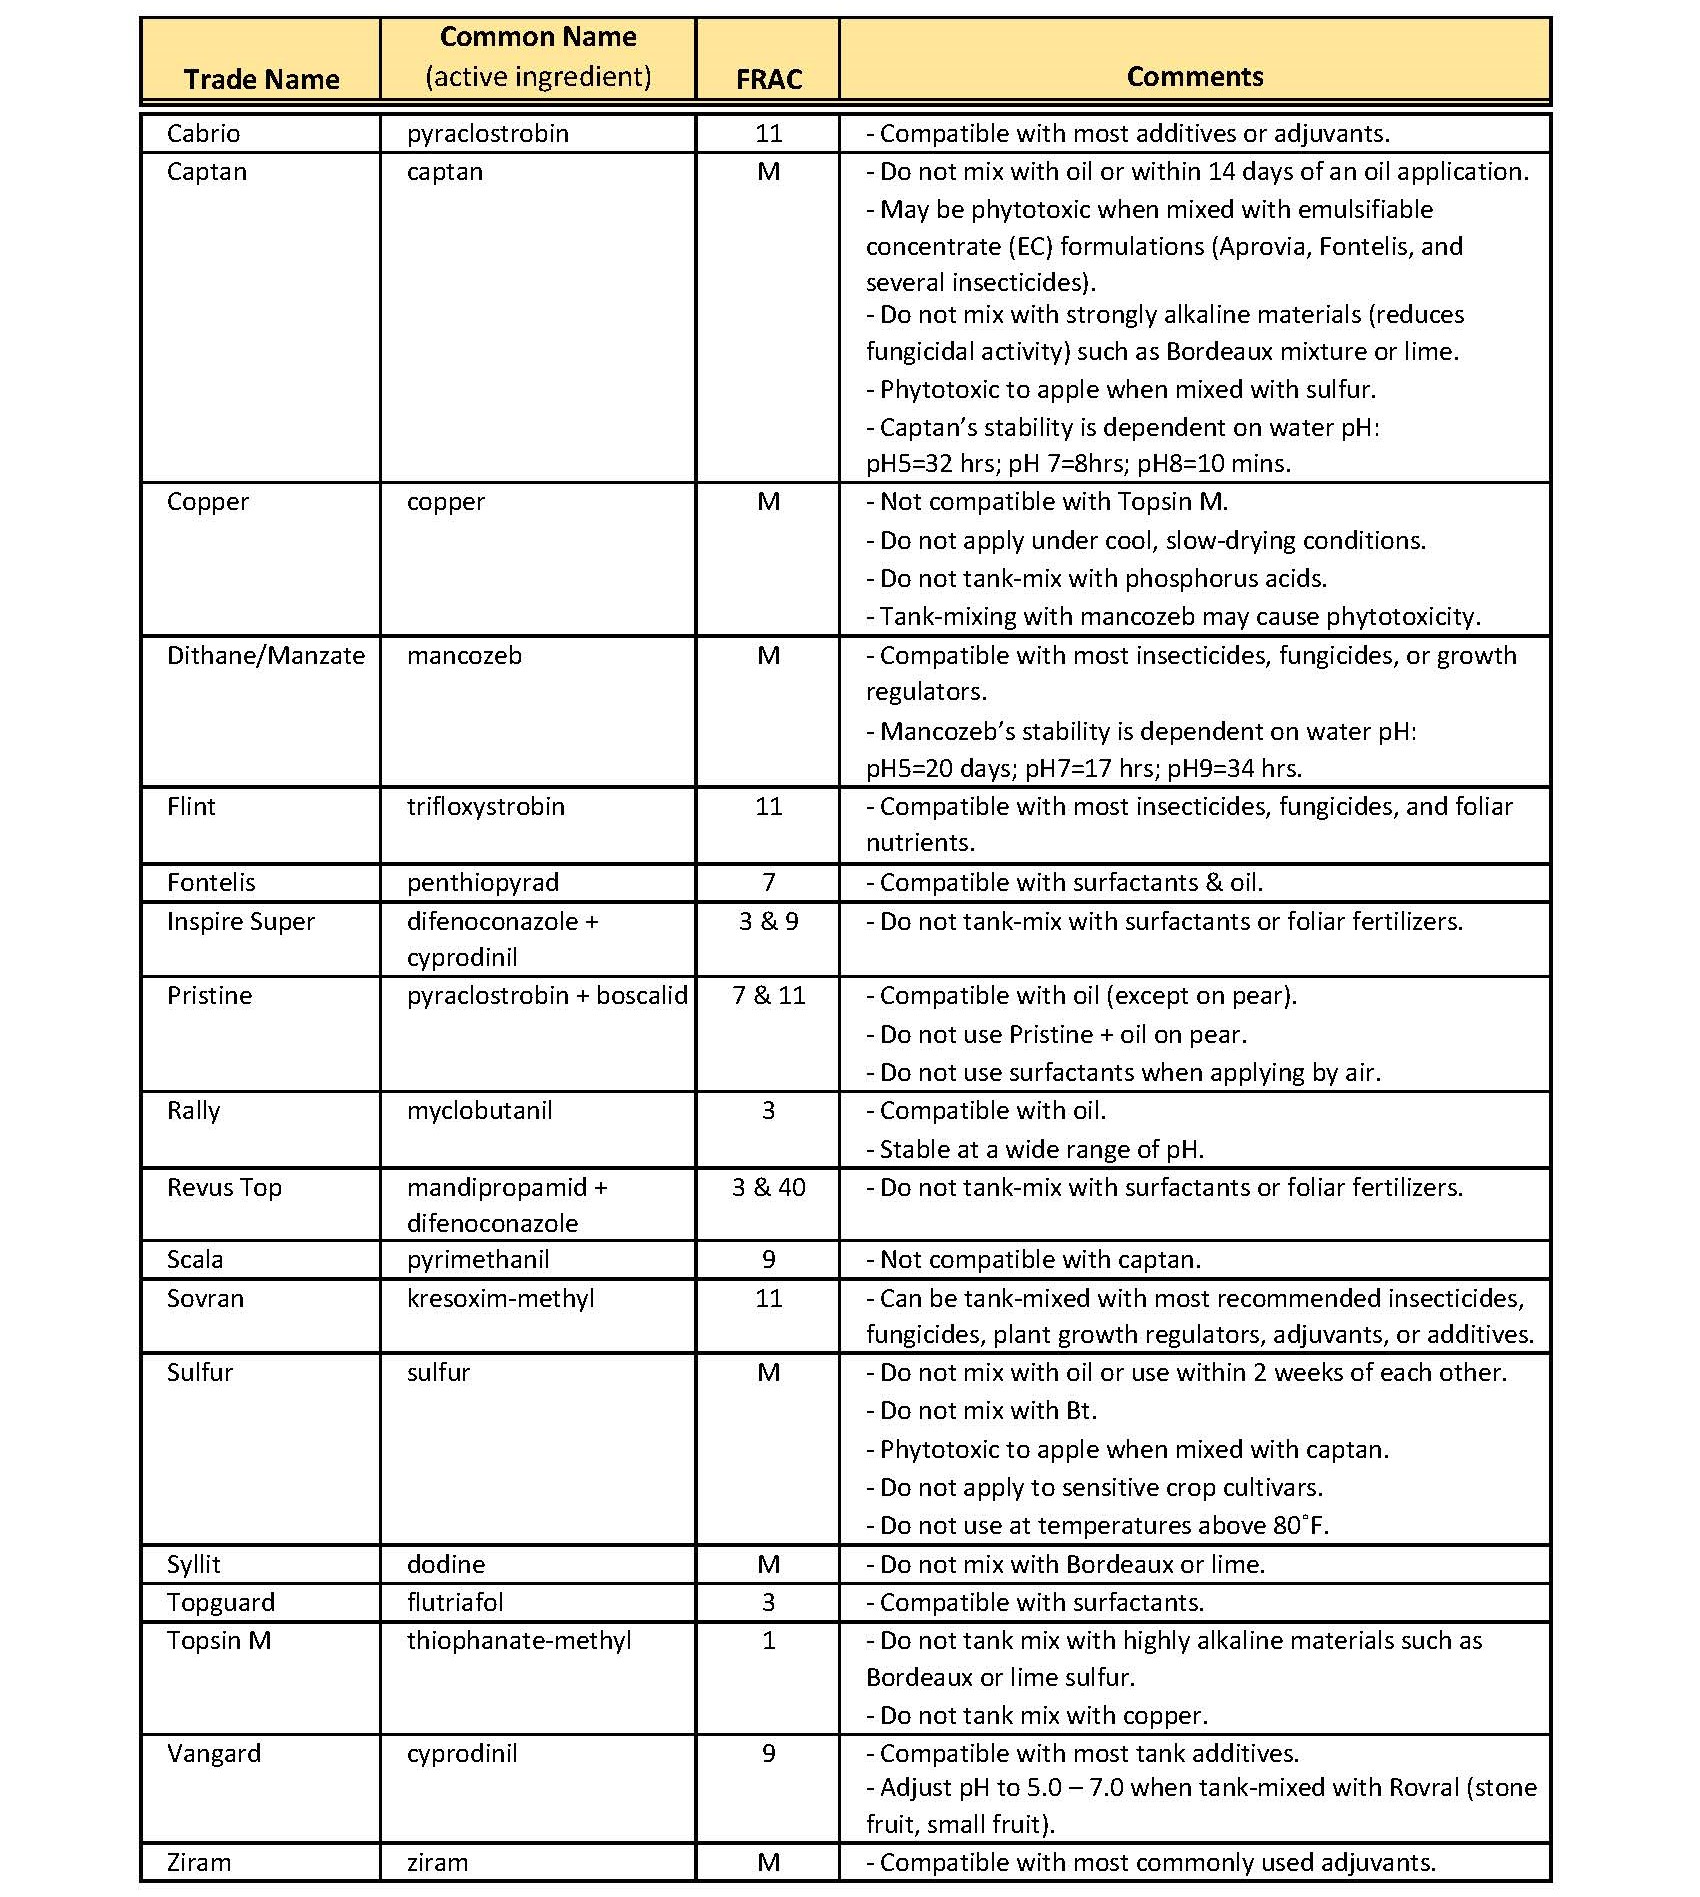 Table of Compatibility for Common Orchard Fungicides